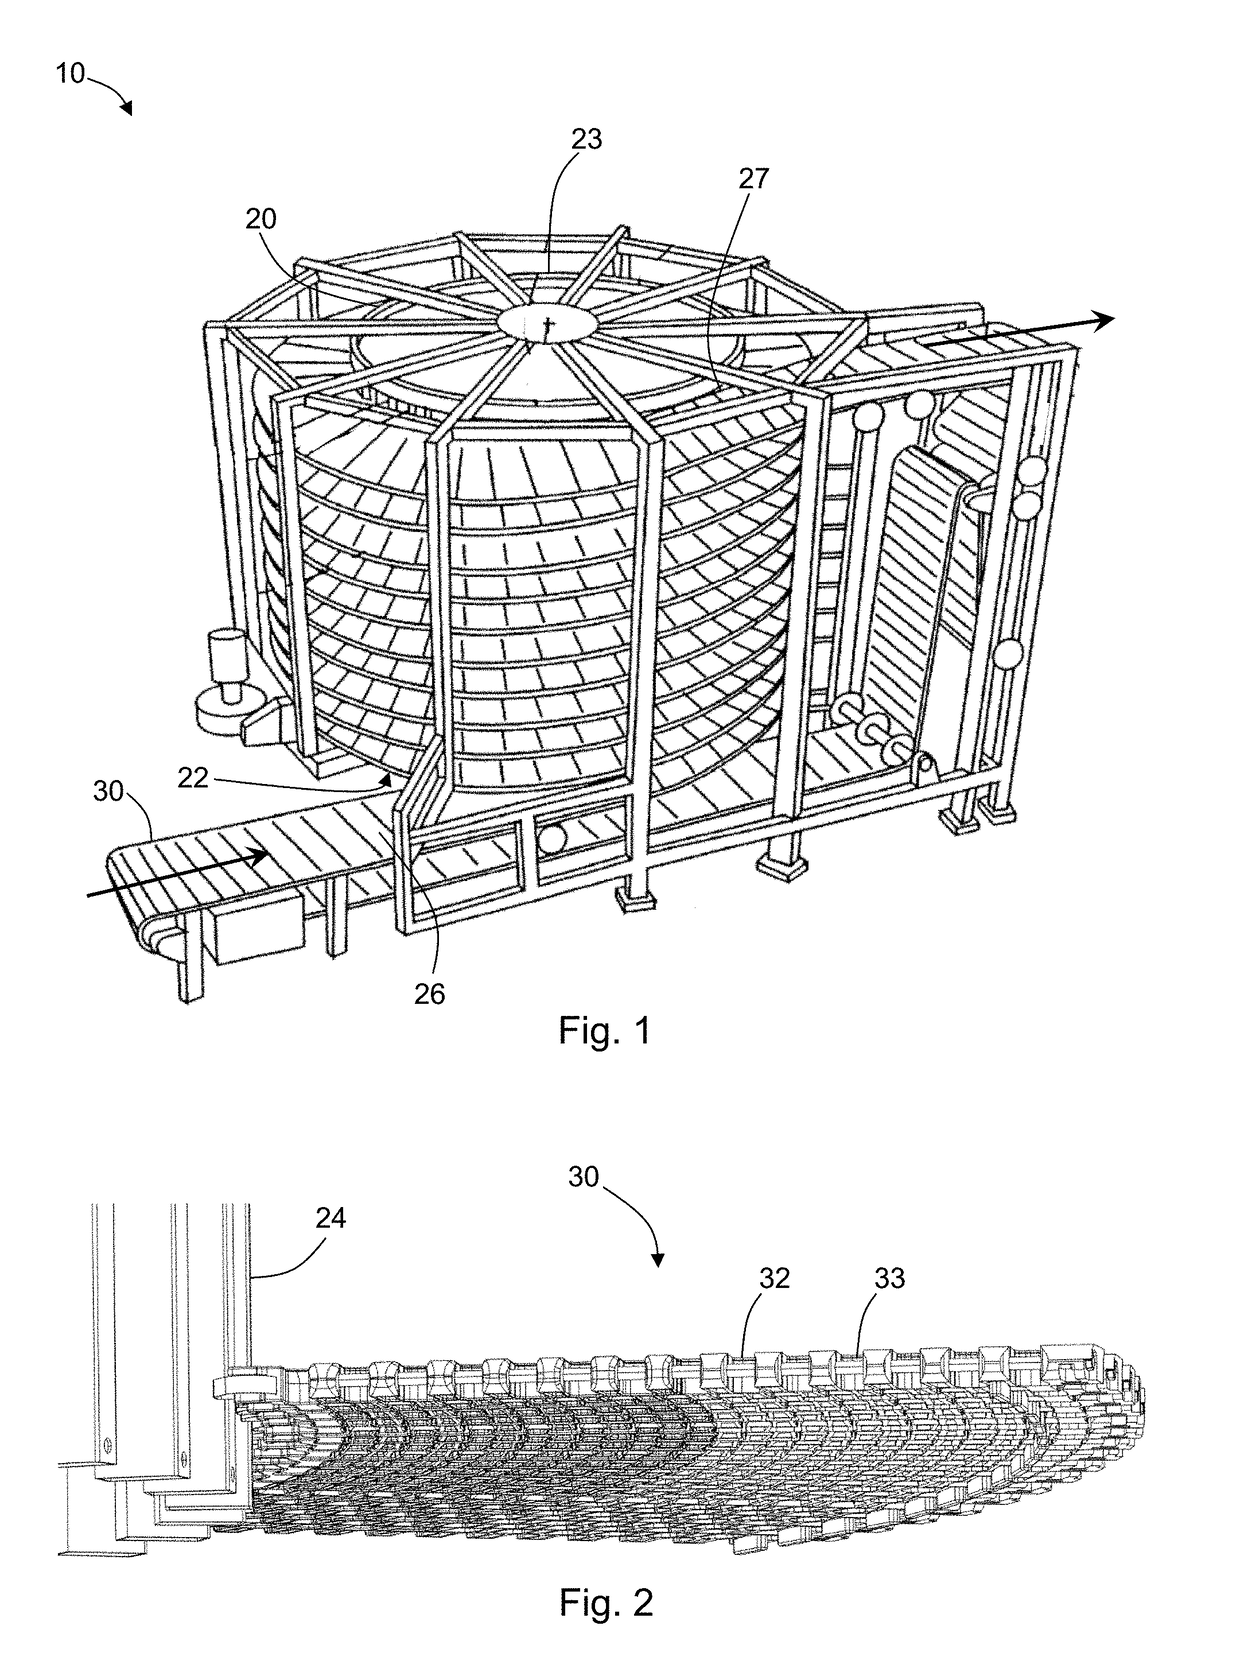 Positive Drive for a Spiral Conveyor and Belt Module for a Radius or Spiral Conveyor